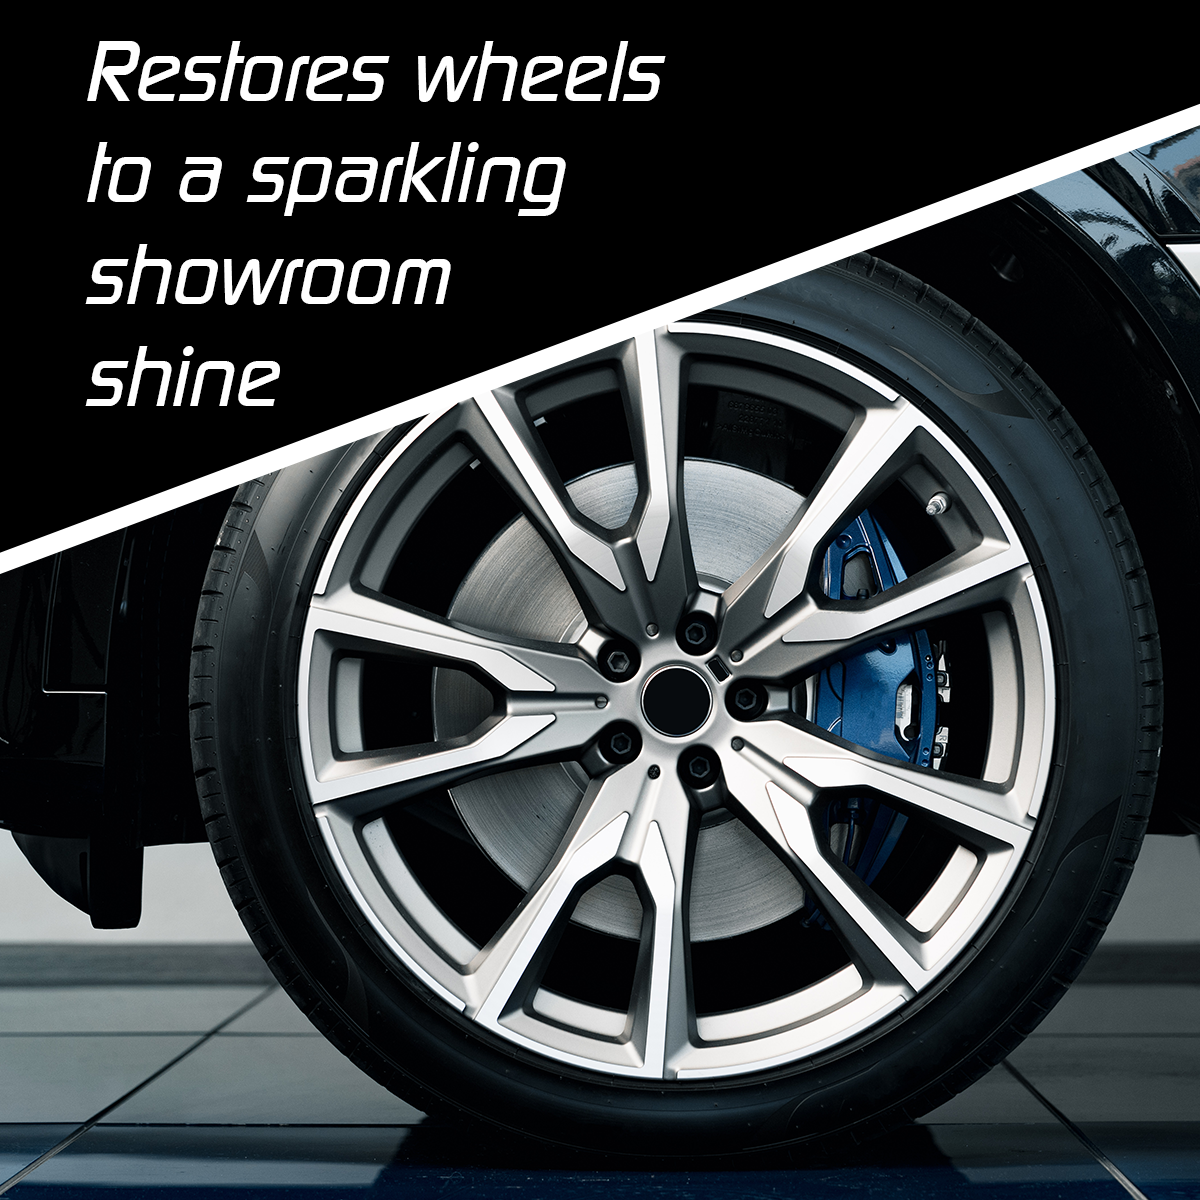 Restores wheels to a sparkling showroom shine